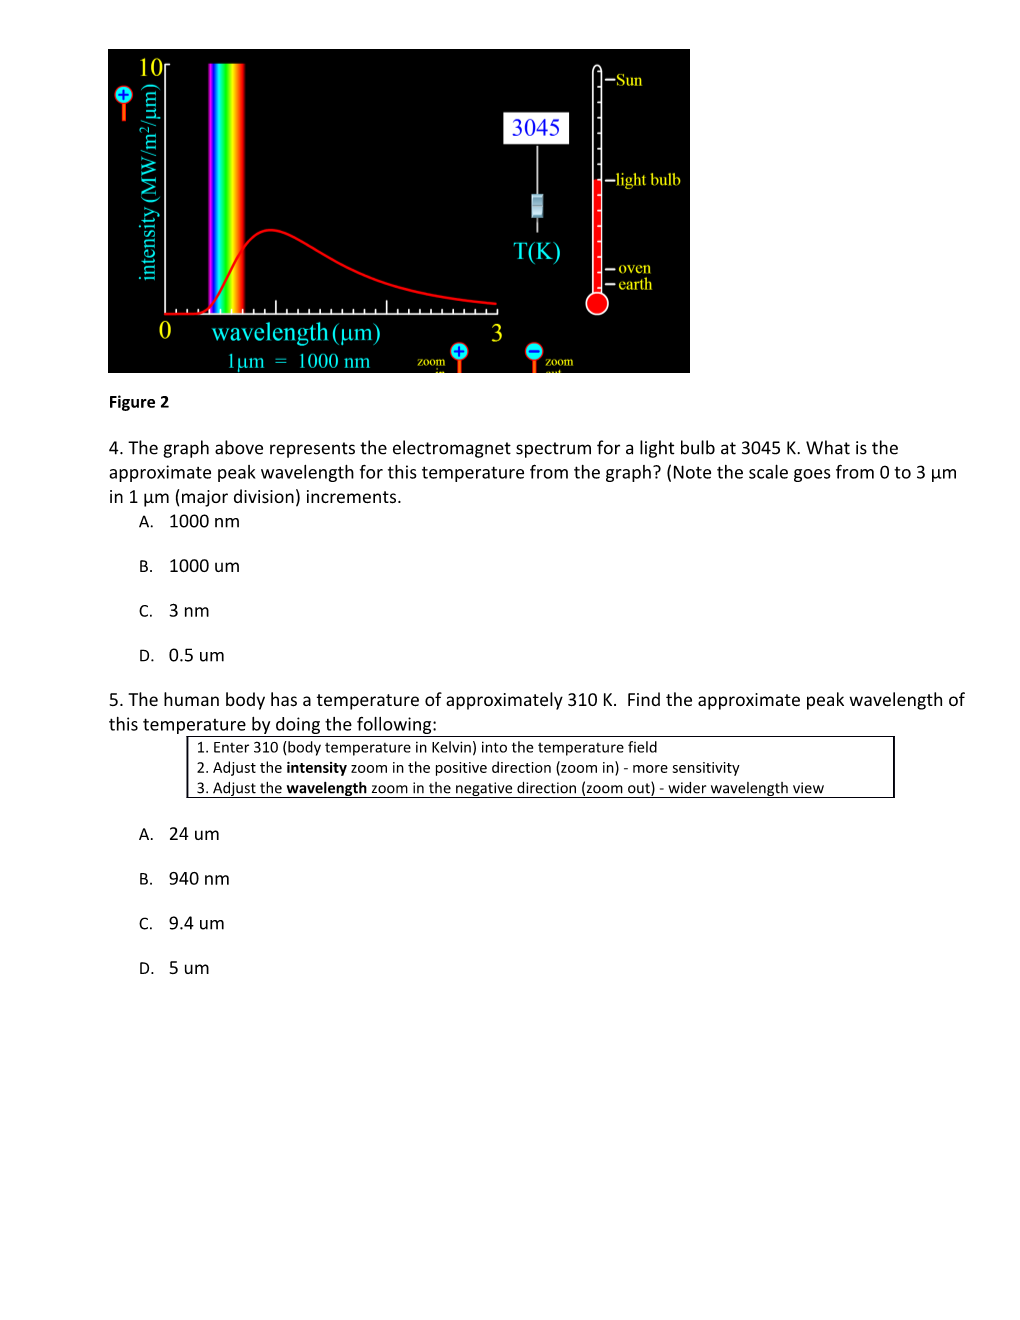 How Does the Temperature of a Blackbody Effect the Maximum Wavelength of Light It Gives Off?